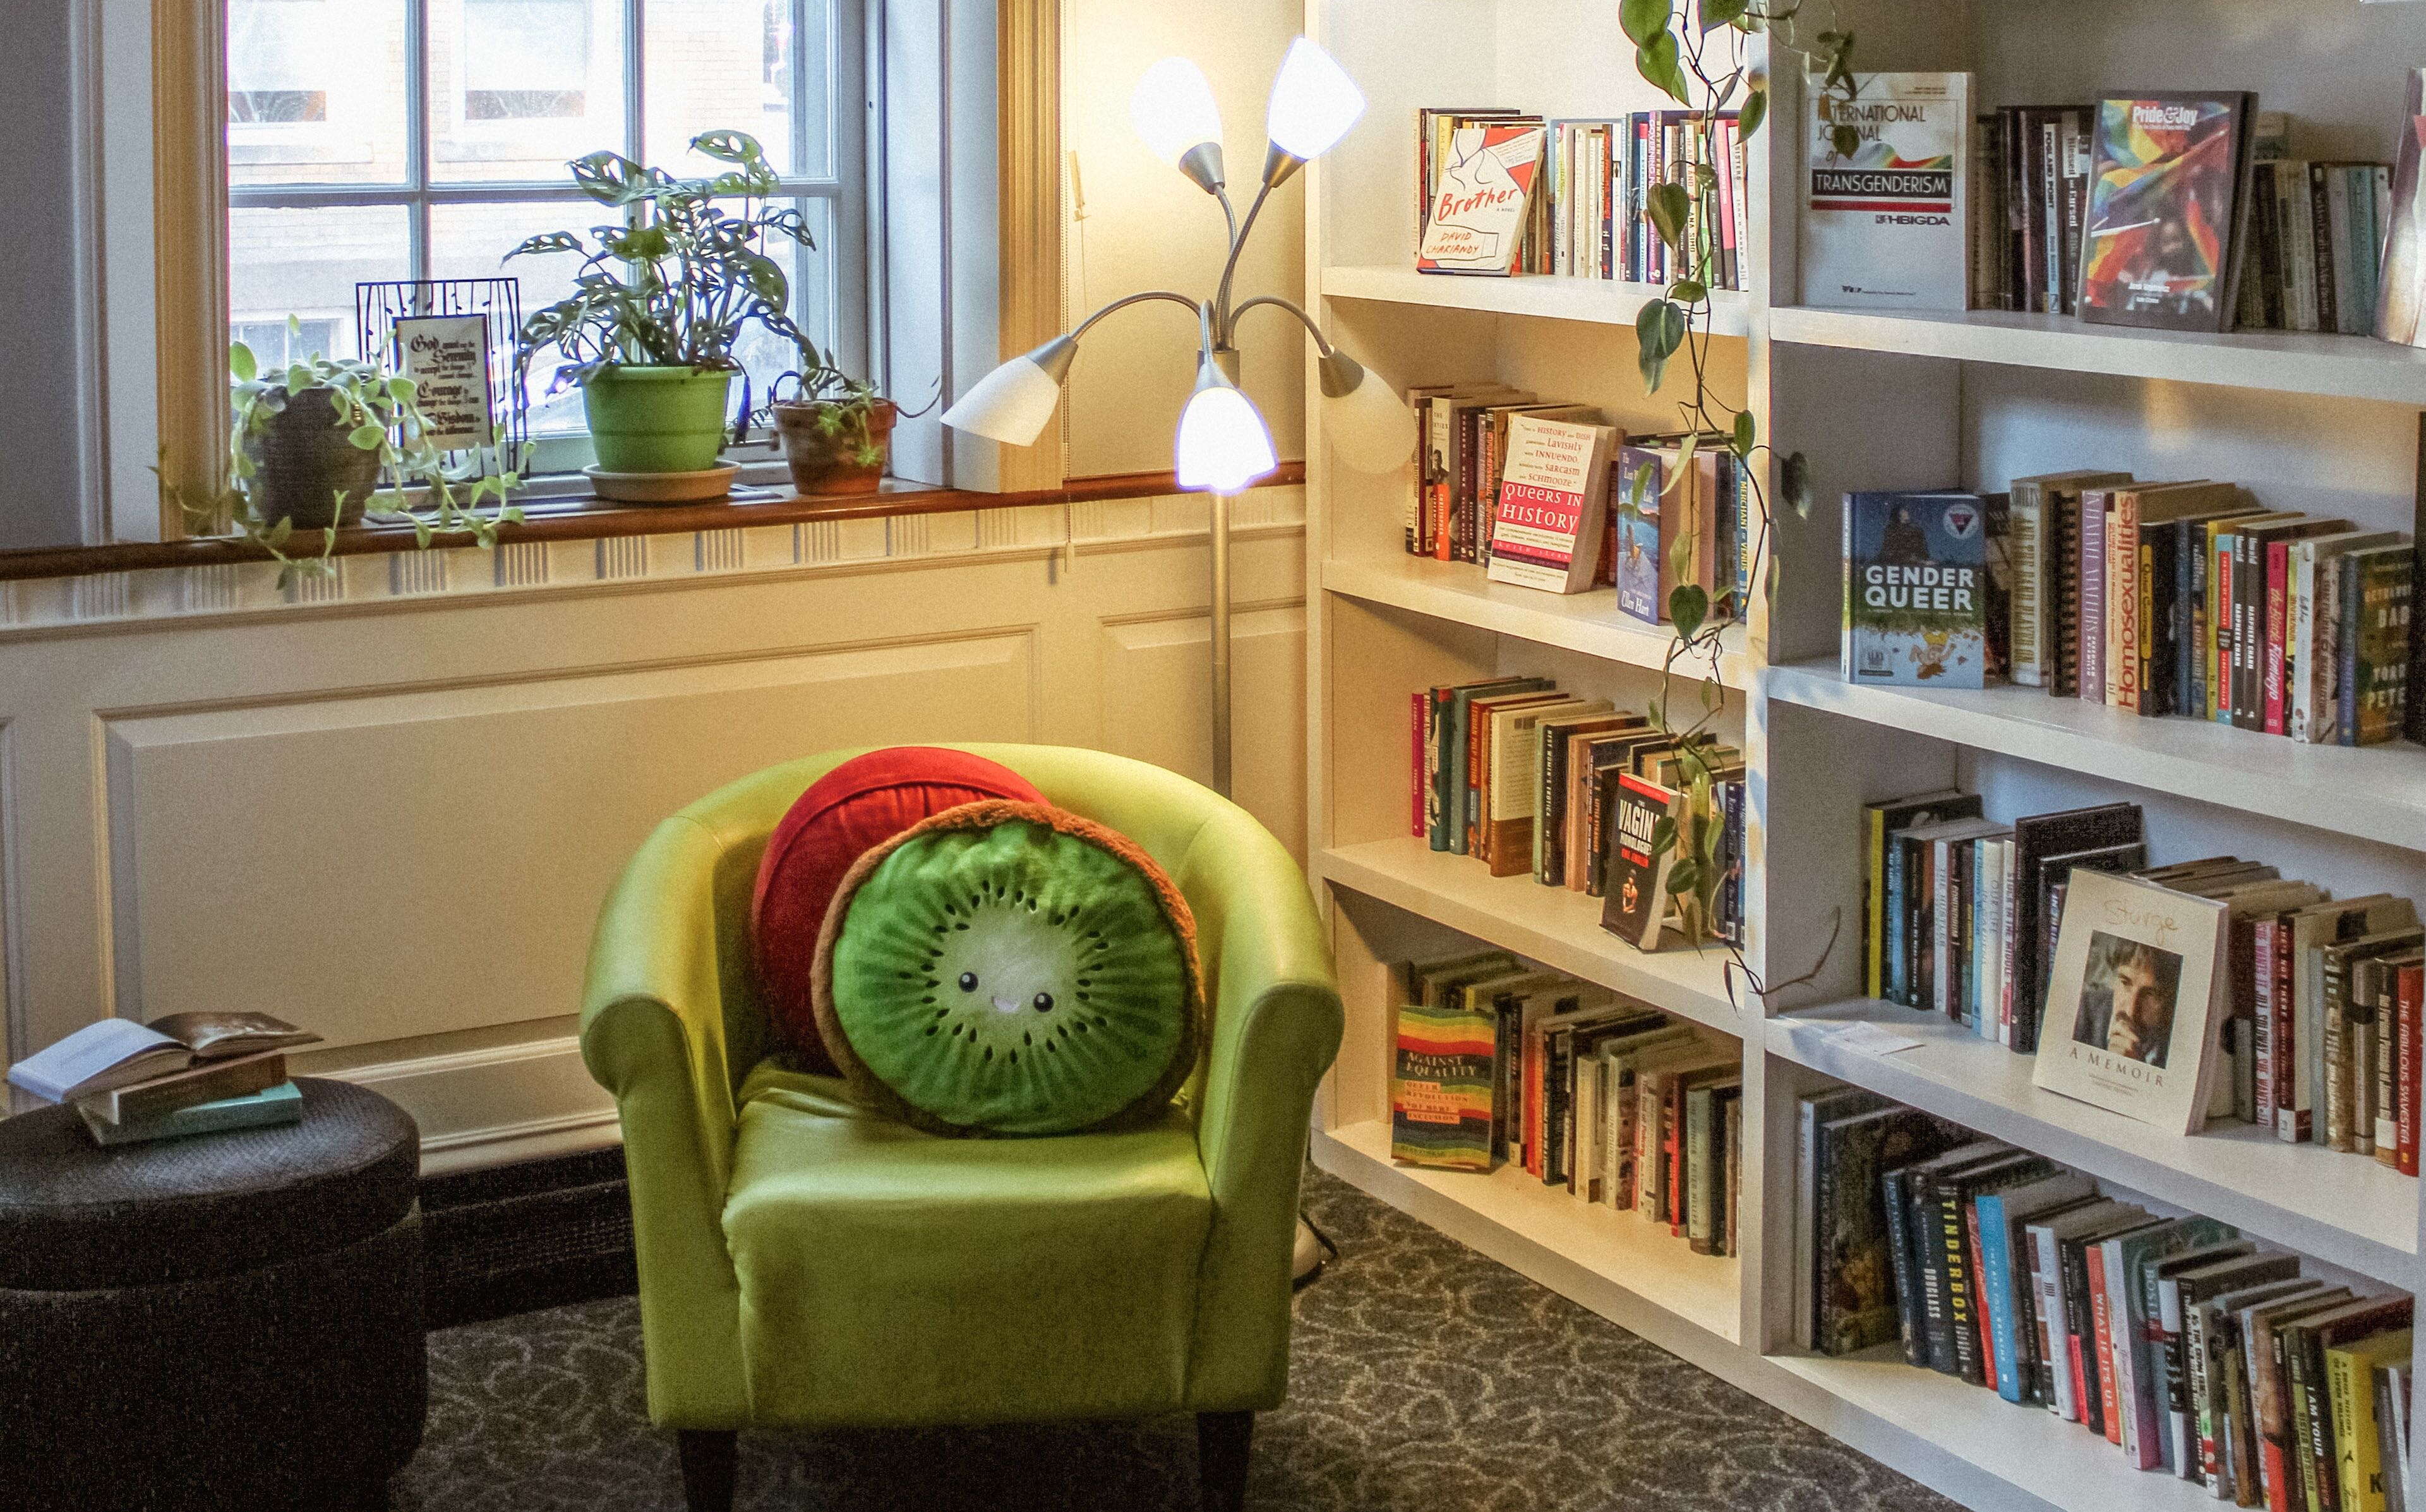 The reading room at the Equality Community Center includes a padded chair and shelves full of books.